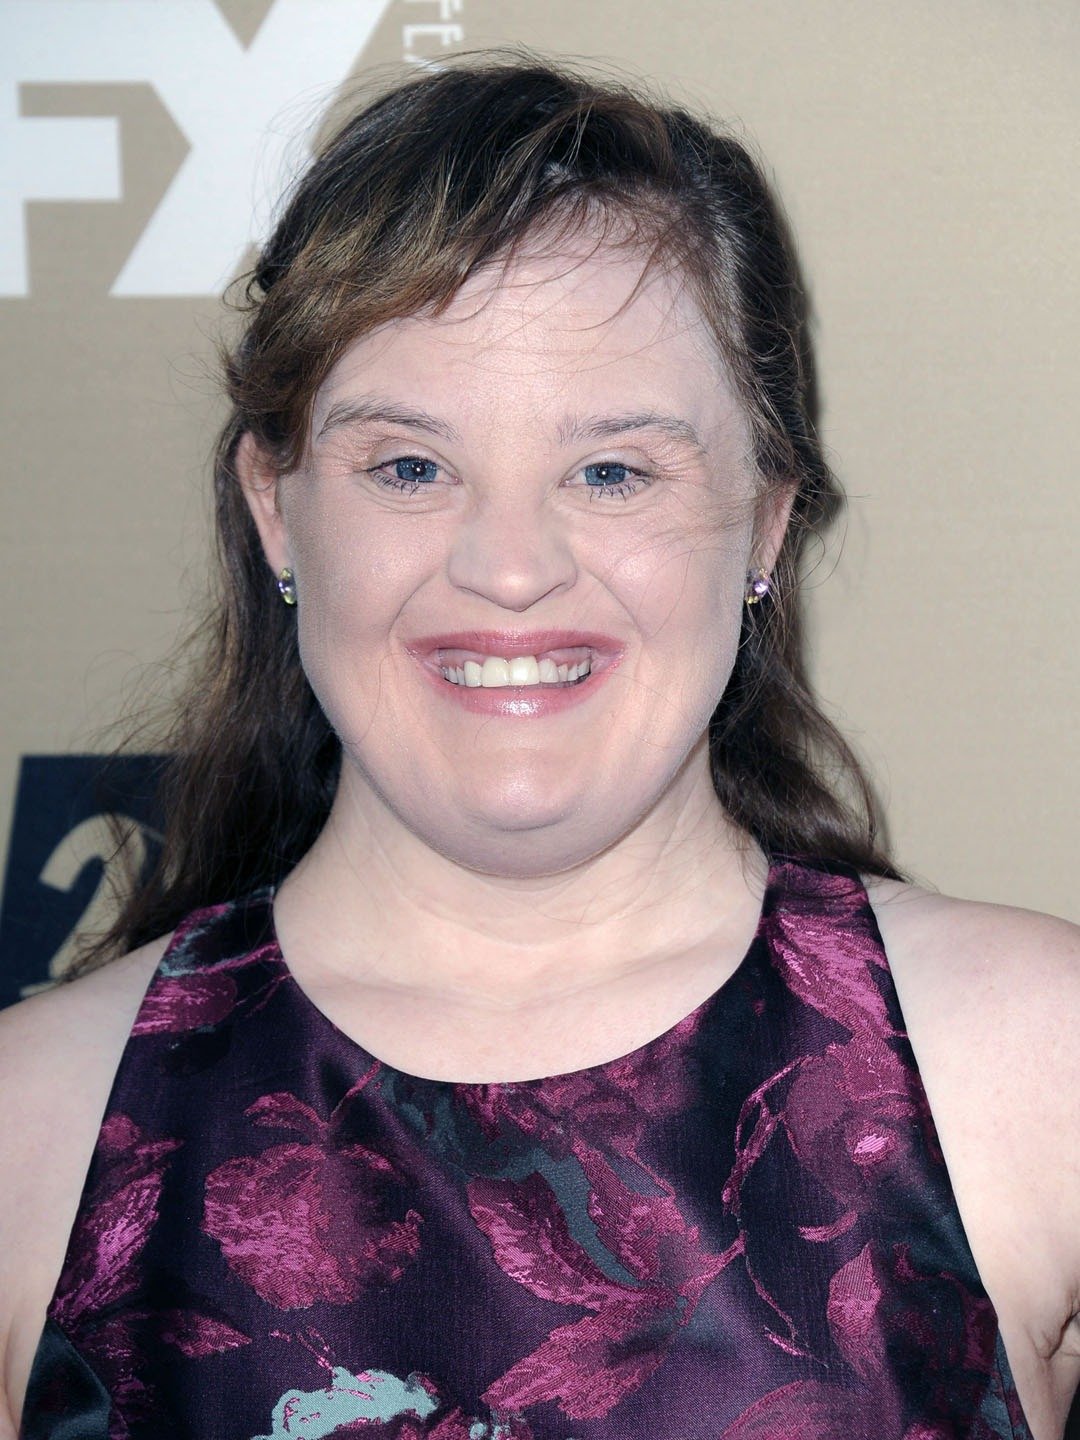 How tall is Jamie Brewer?